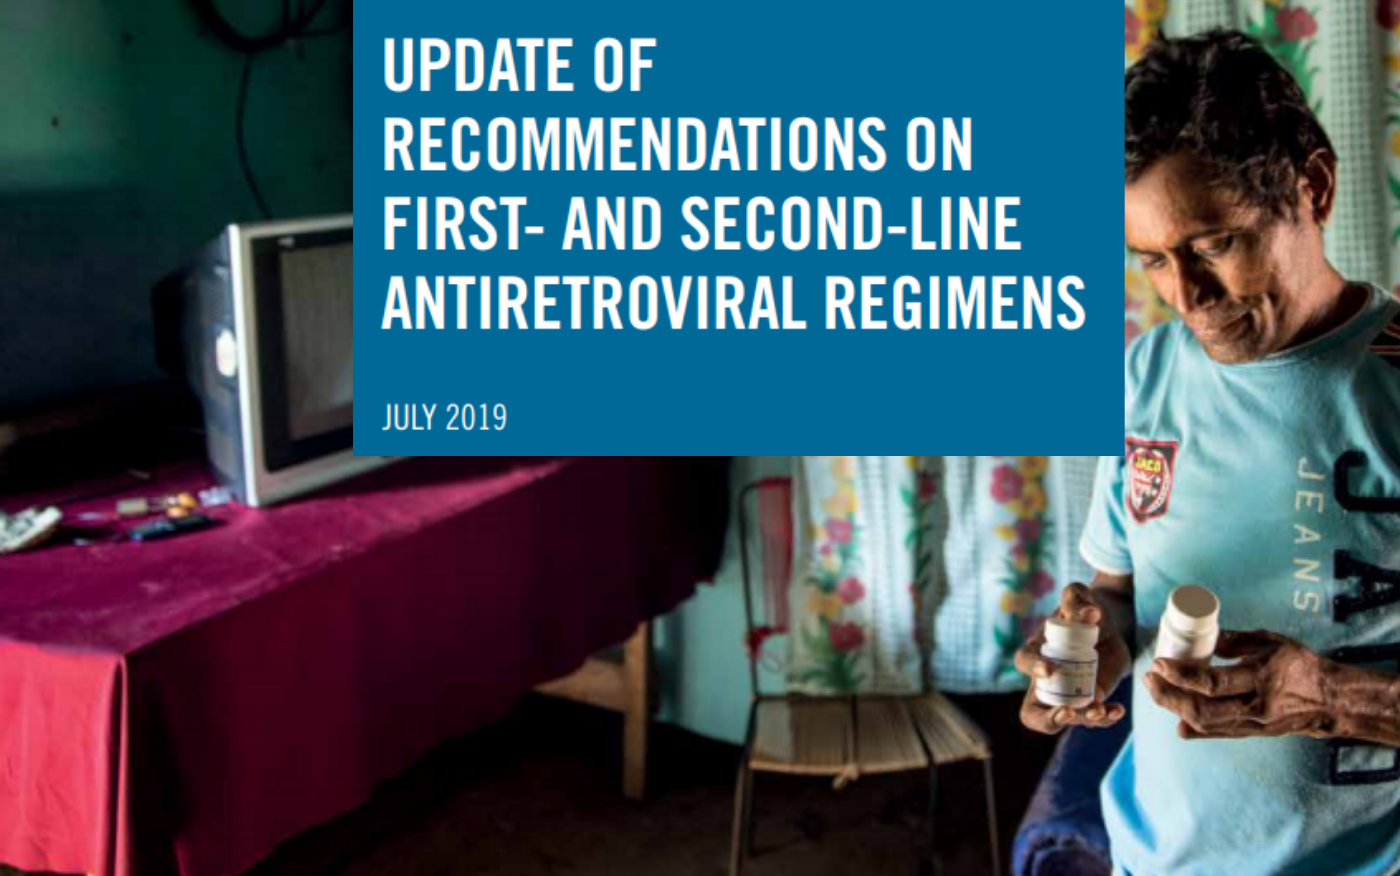 UPDATE OF RECOMMENDATIONS ON FIRST- AND SECOND-LINE ANTIRETROVIRAL REGIMENS